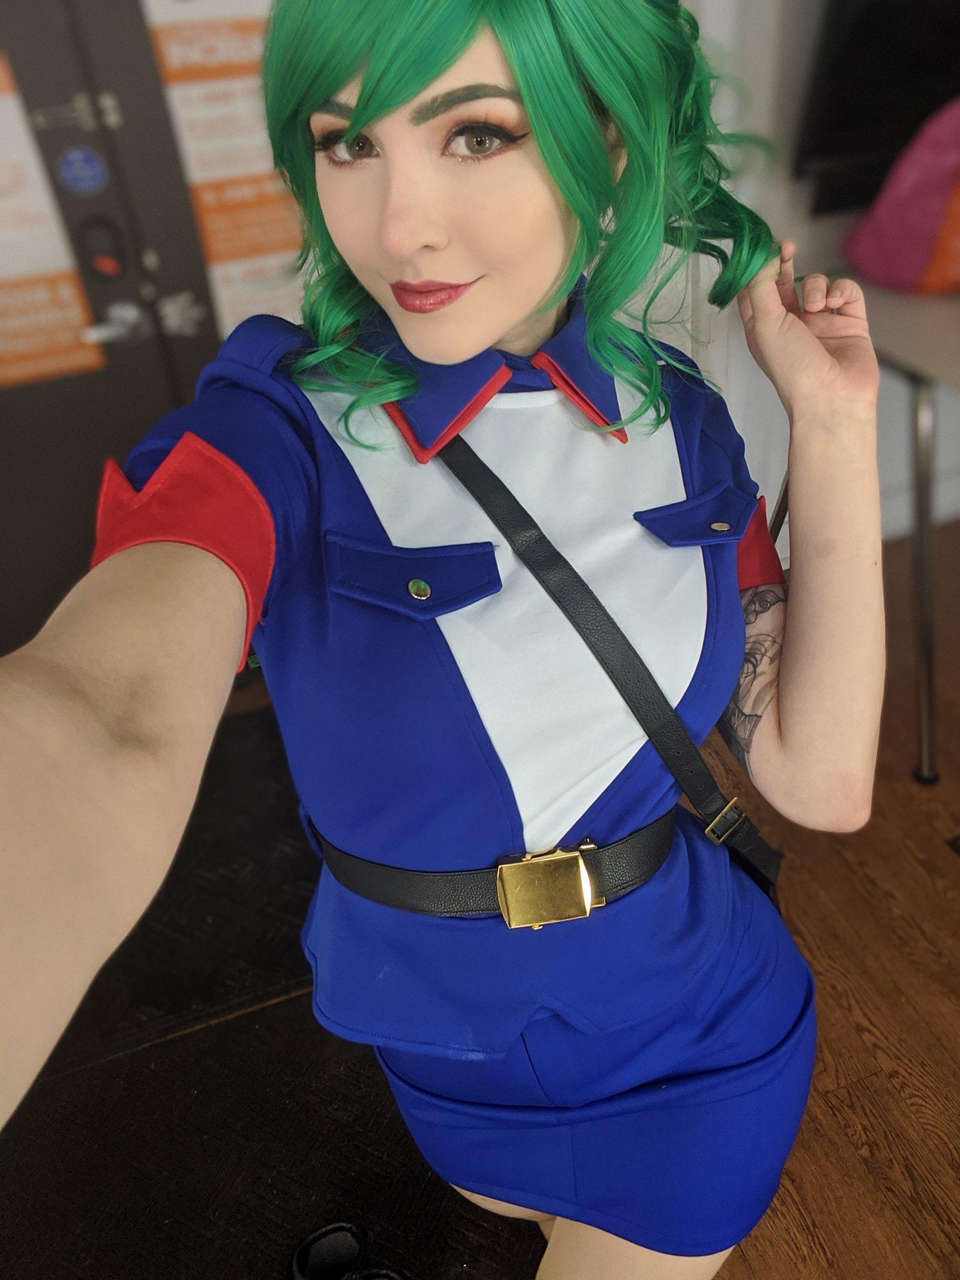 Luxlo As Officer Jenny From Pokemo